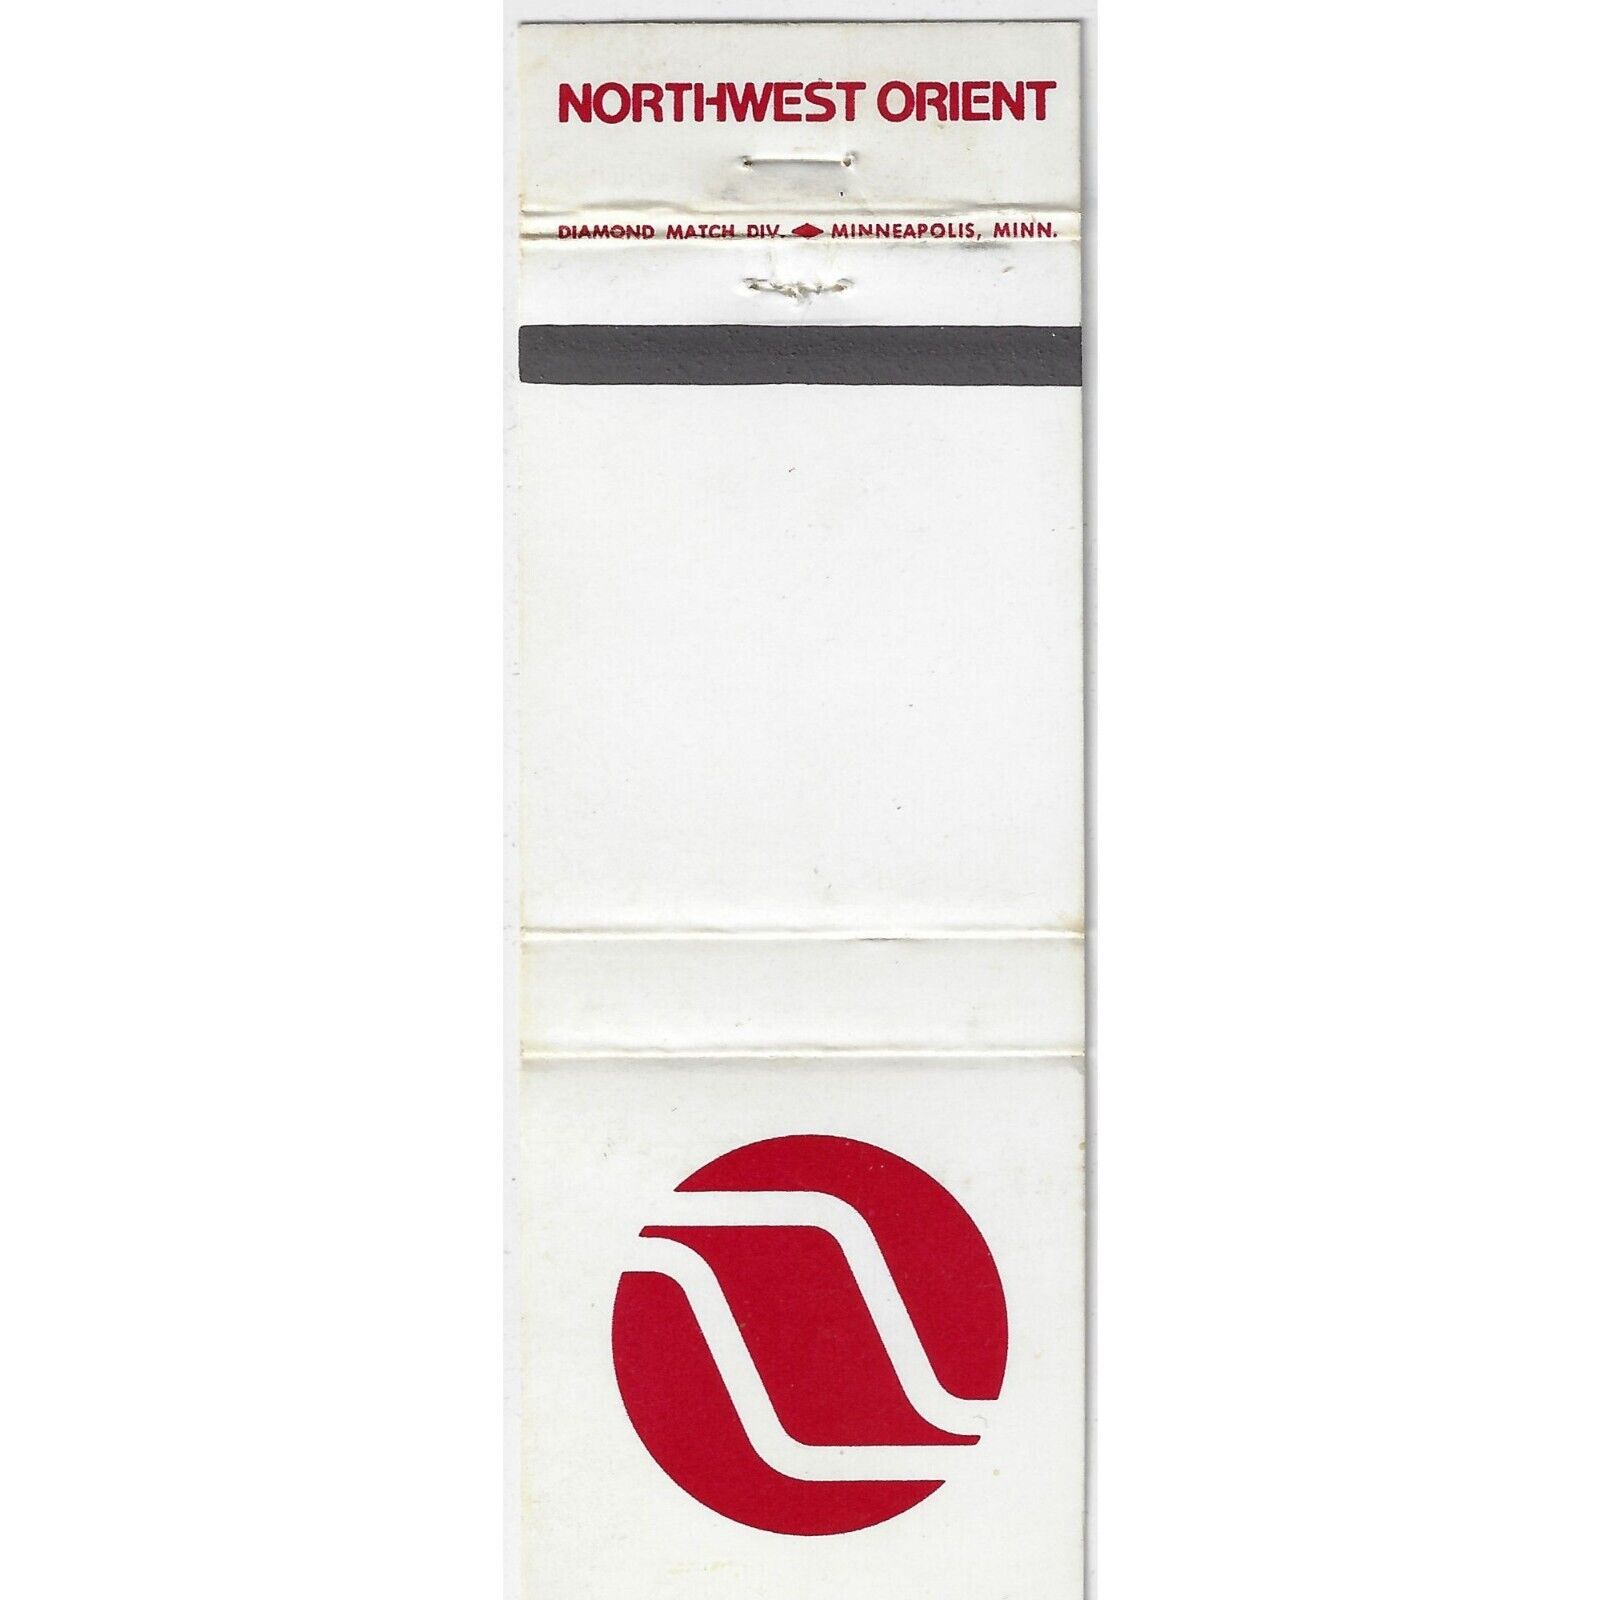 Northwest Orient Shipping Lines LOGO RS Empty Matchbook Cover